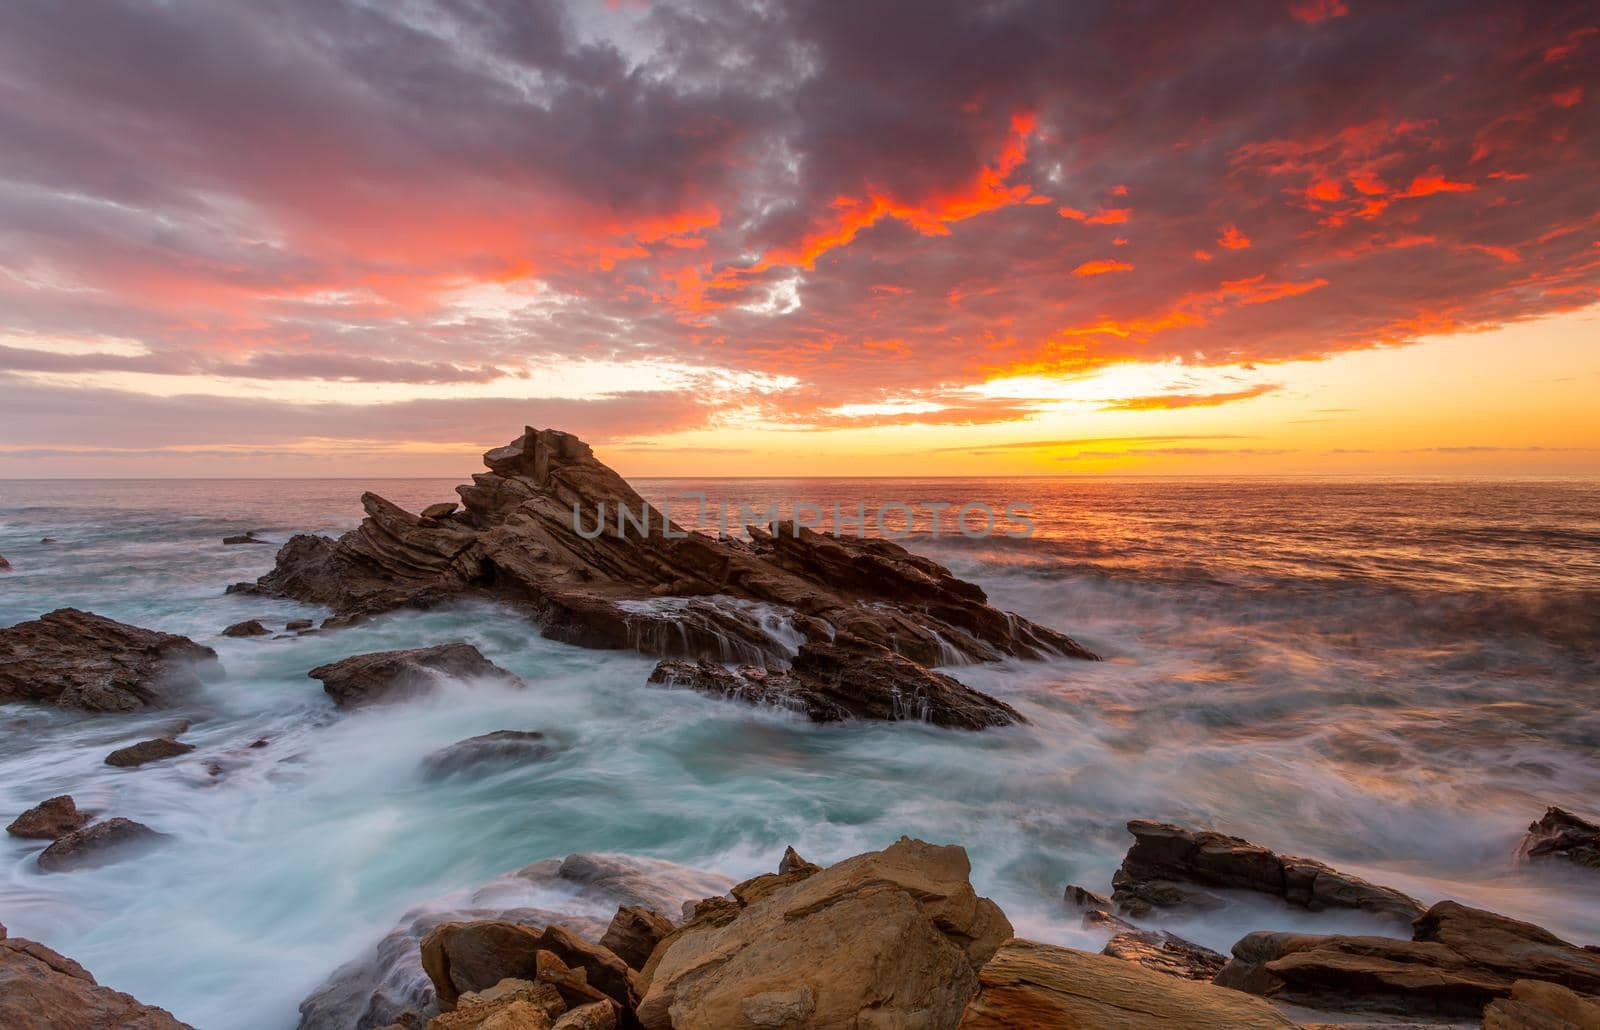 Sunrise over the ocean with rocky beach coast and flowing waves moving around jagged rocks in the foreground.